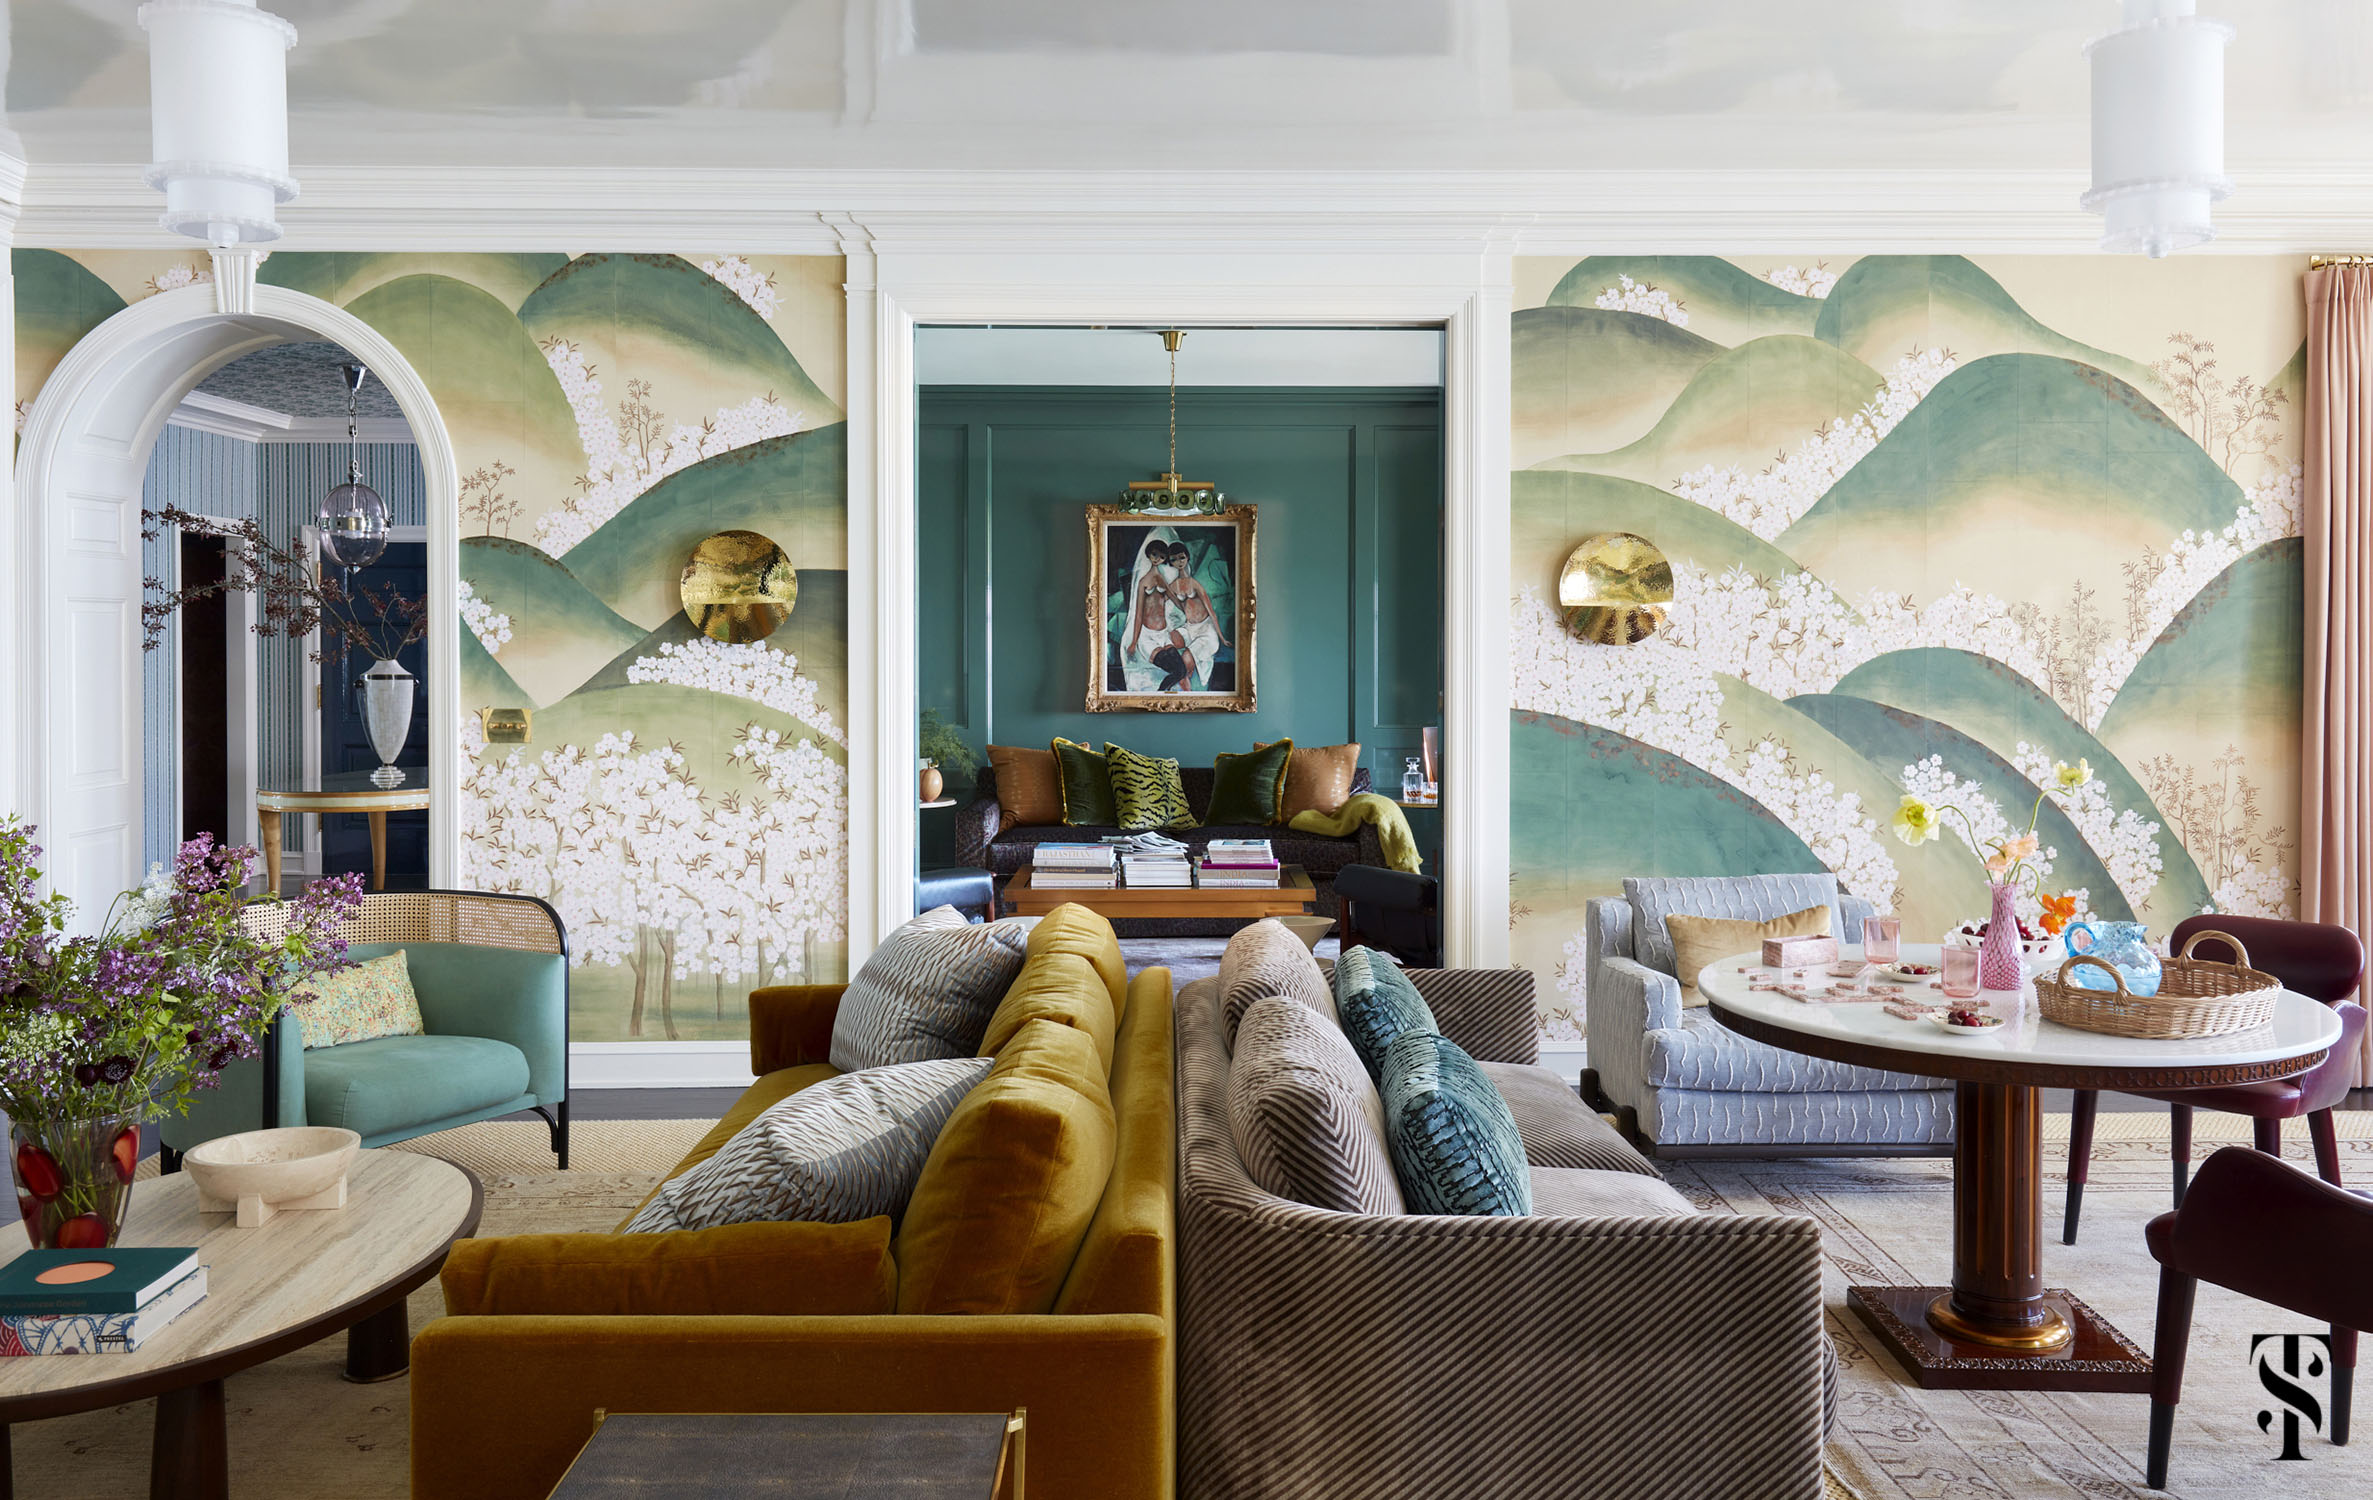 Living room designed by Summer Thornton featuring de Gournay Kiso Mountains wallpaper, Urban Electric Cogg pendants, and Soane Helios sconces beneath a high gloss lacquer painted ceiling using Fine Paints of Europe.